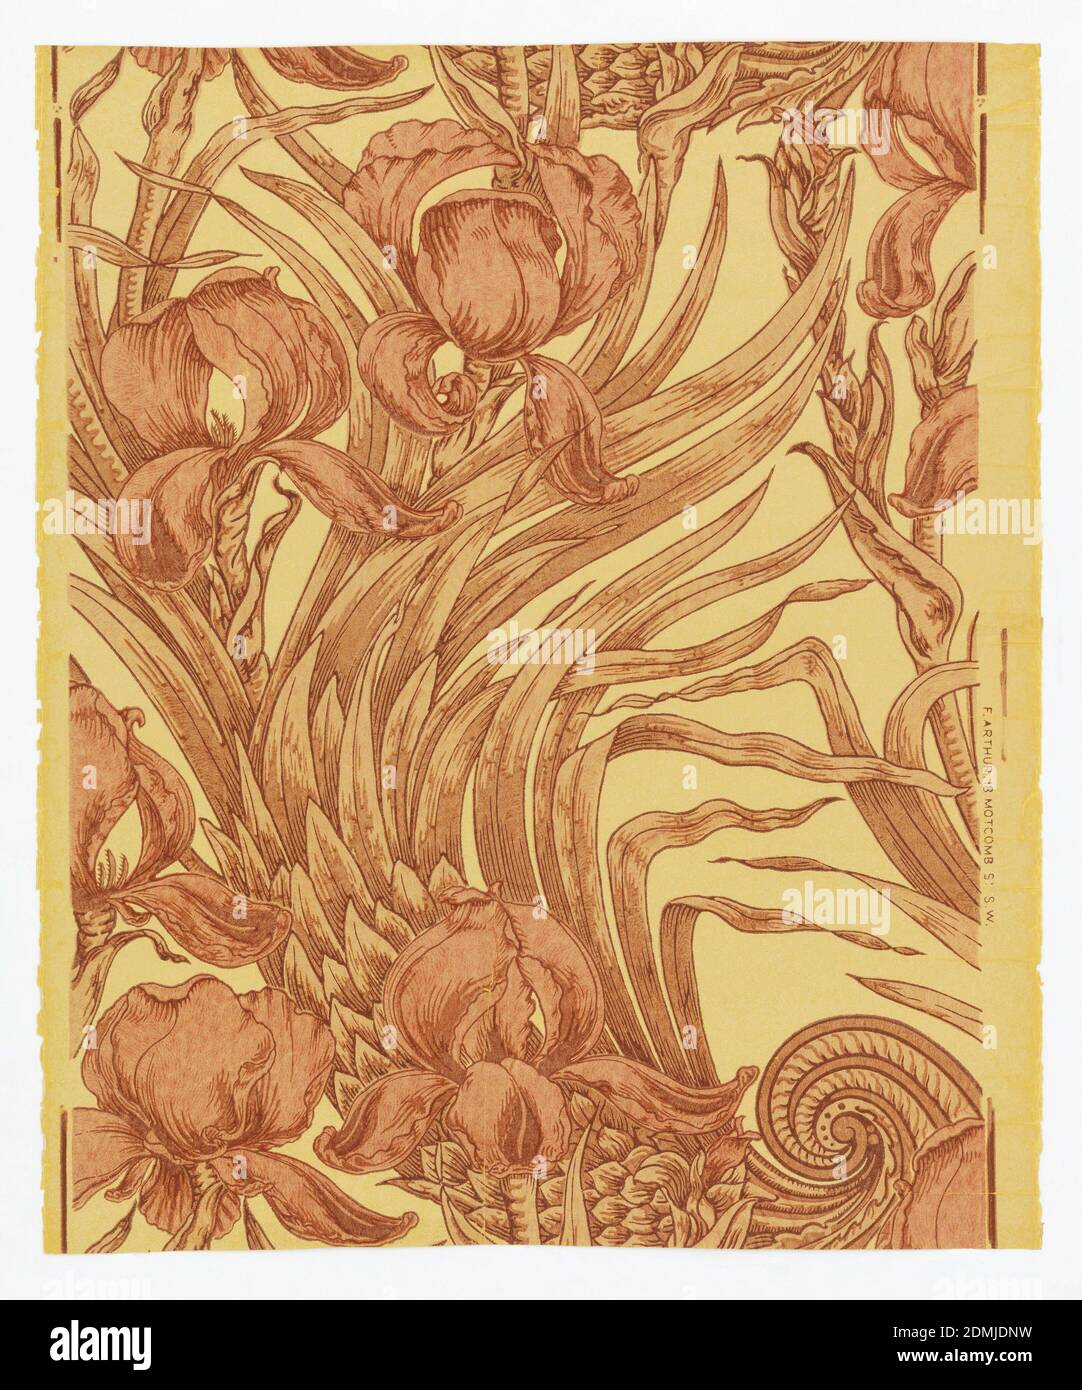 Sidewall, F. Arthur, Machine-printed, Iris in shades of brown and peach over yellow, mica ground., England, 1875–99, Wallcoverings, Sidewall Stock Photo